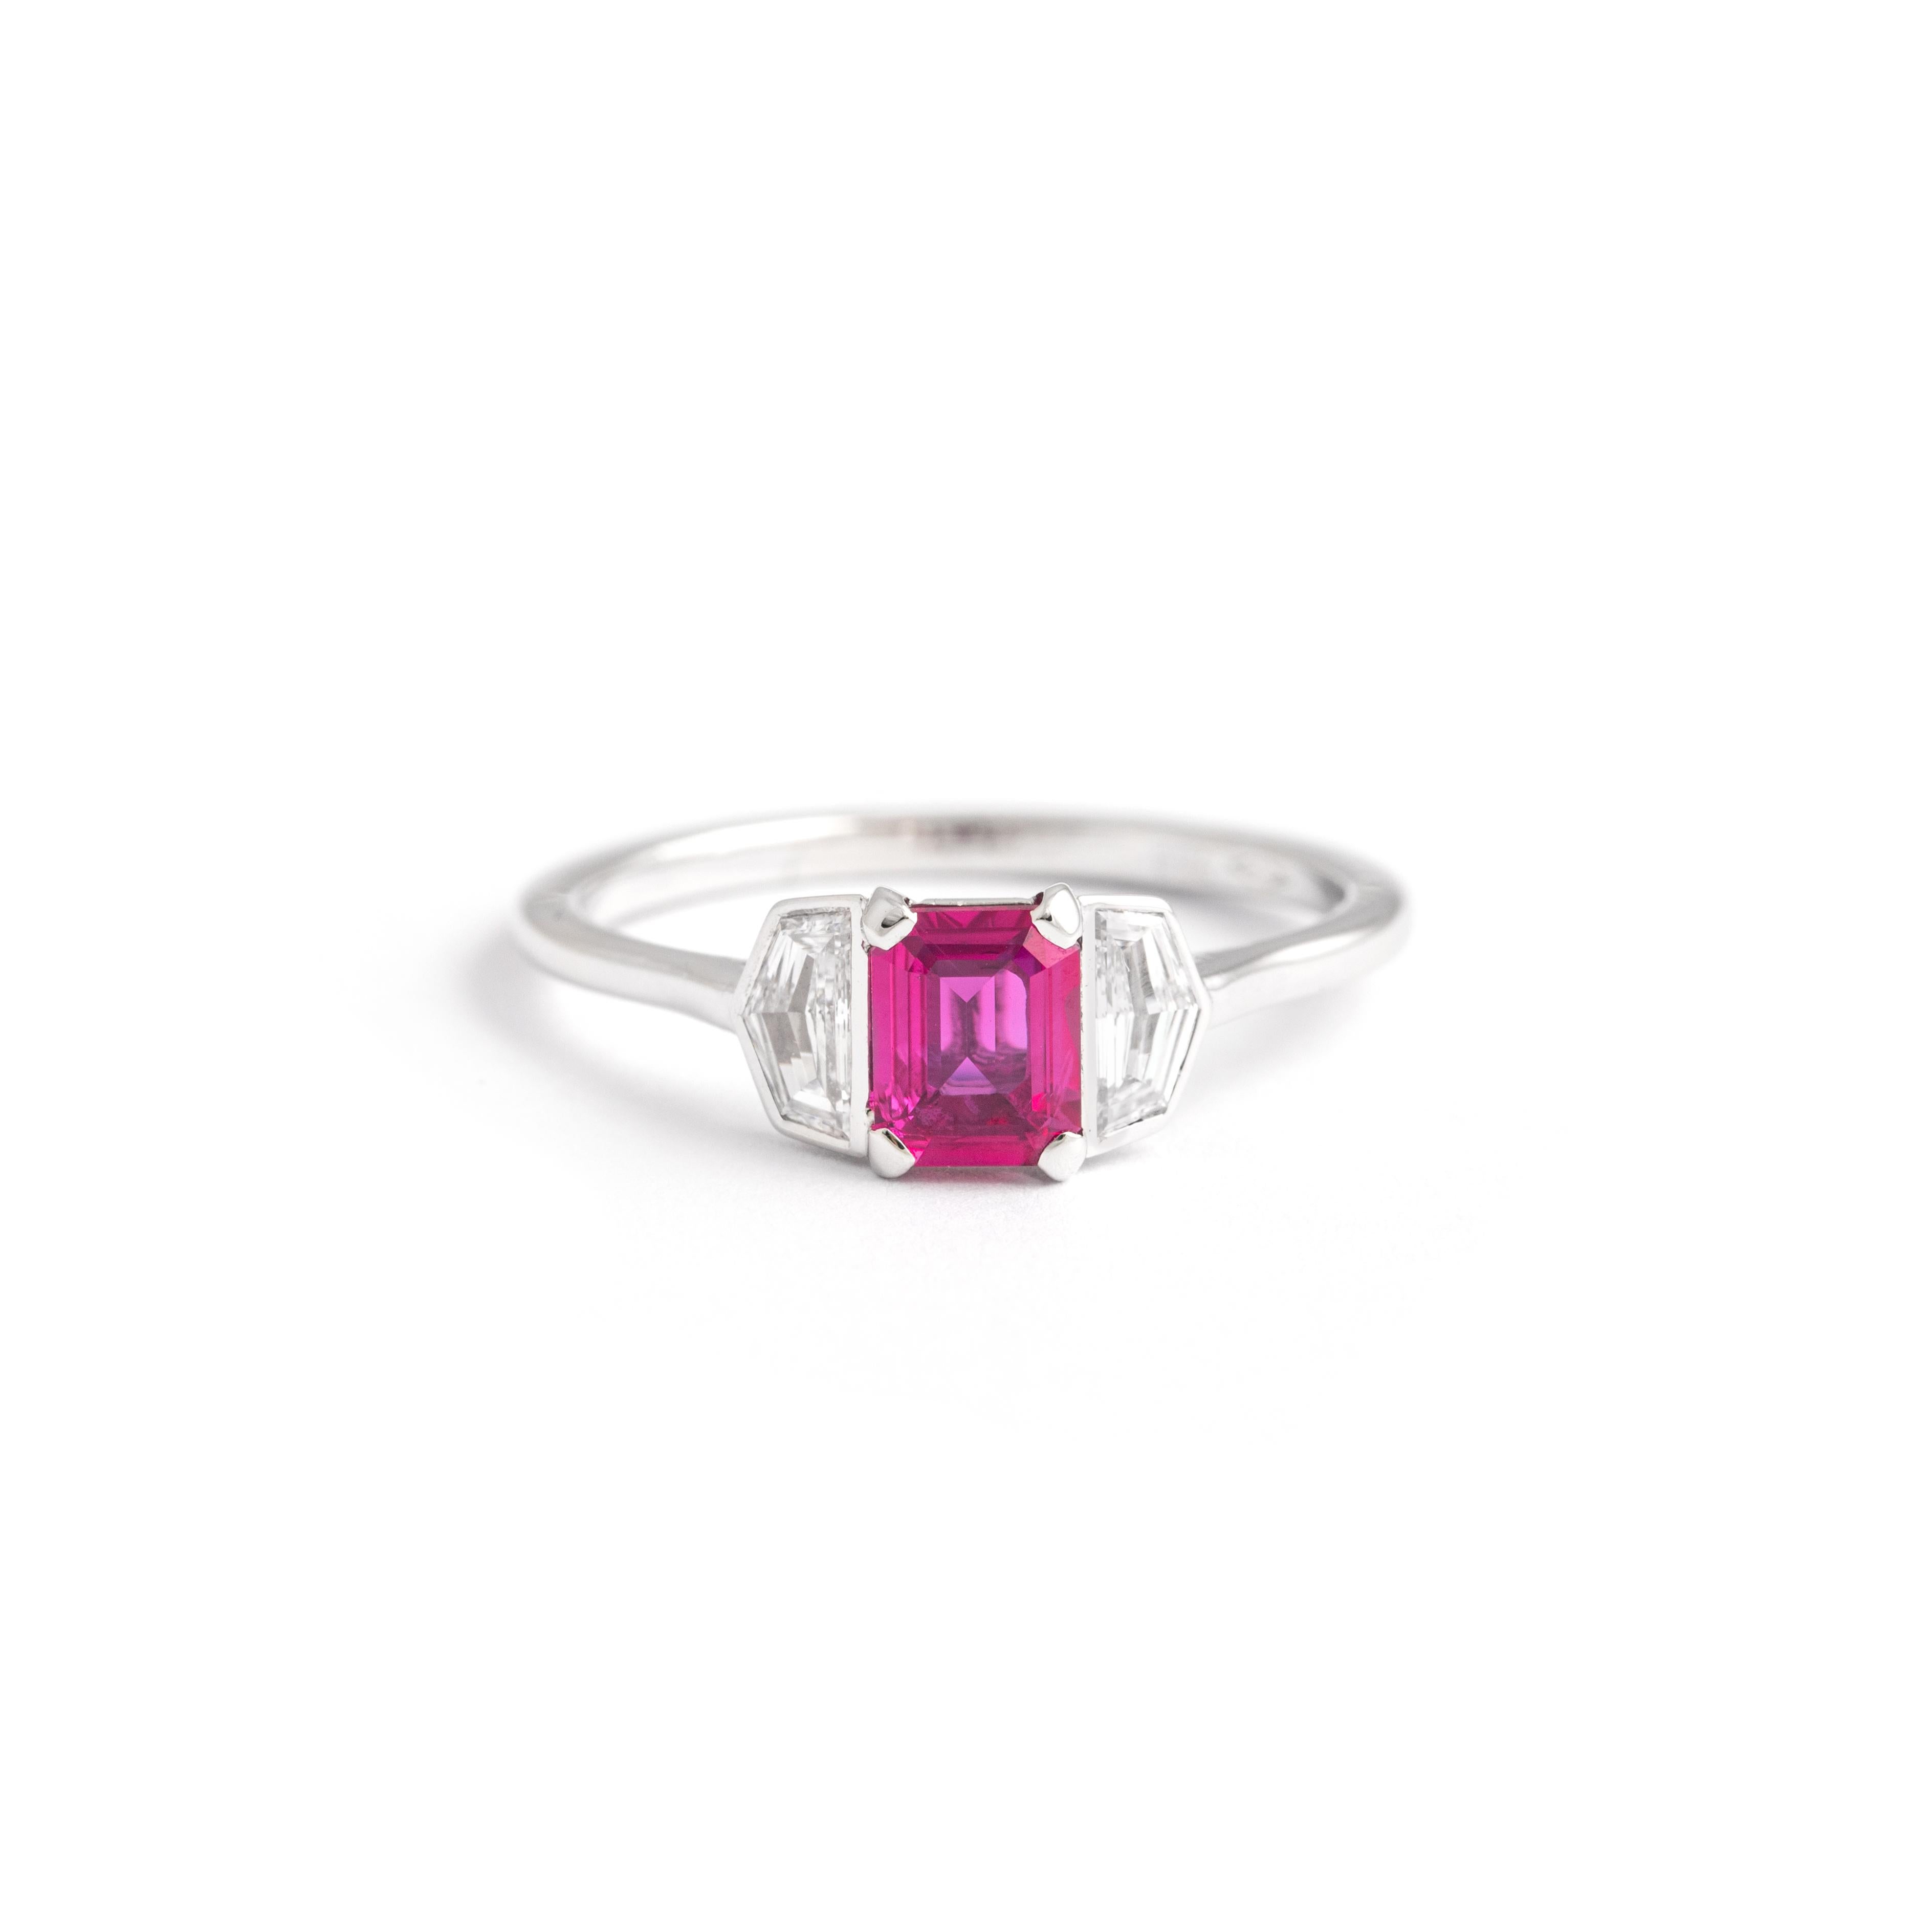 Emerald Cut 0.62 Carat Ruby Diamond White Gold Ring For Sale